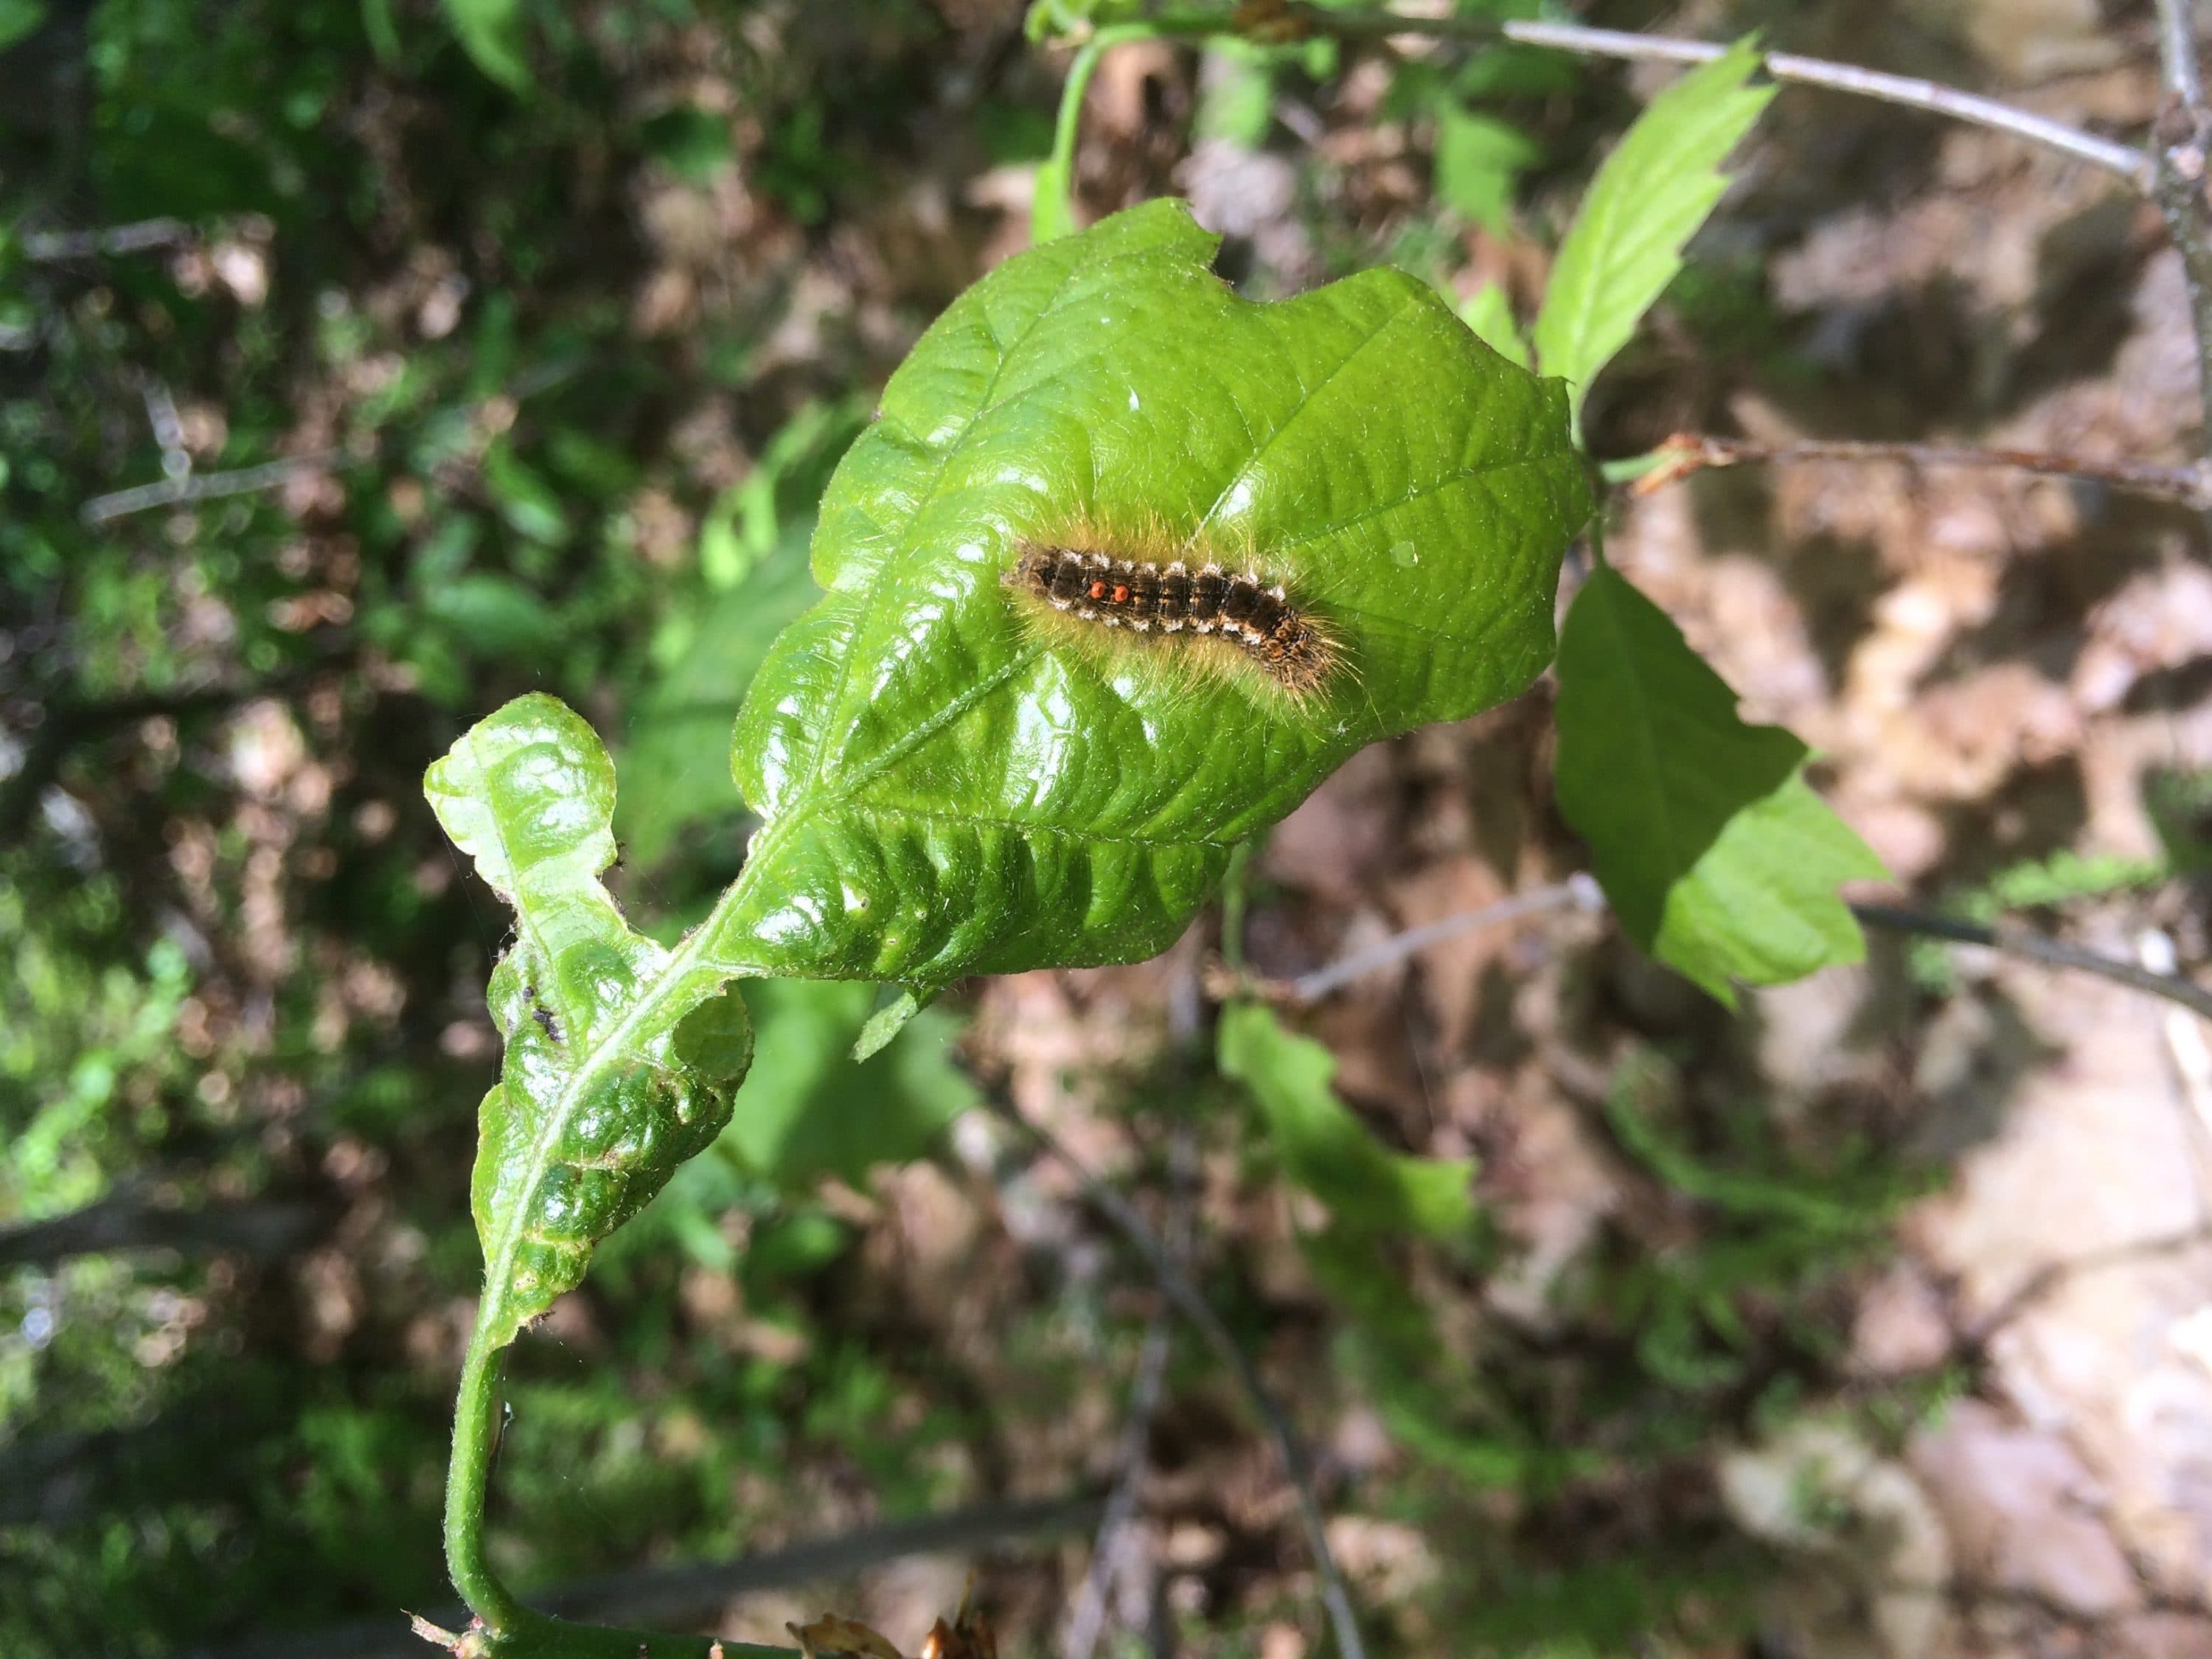 In a May 2016 photo provided by the Maine Forest Service, browntail caterpillars feed in Maine. The caterpillars’ hairs can cause a painful rash in humans. State scientists say it’s difficult to control the spread of the bugs, which has been aided by dry weather. (Maine Forest Service ACF via AP)